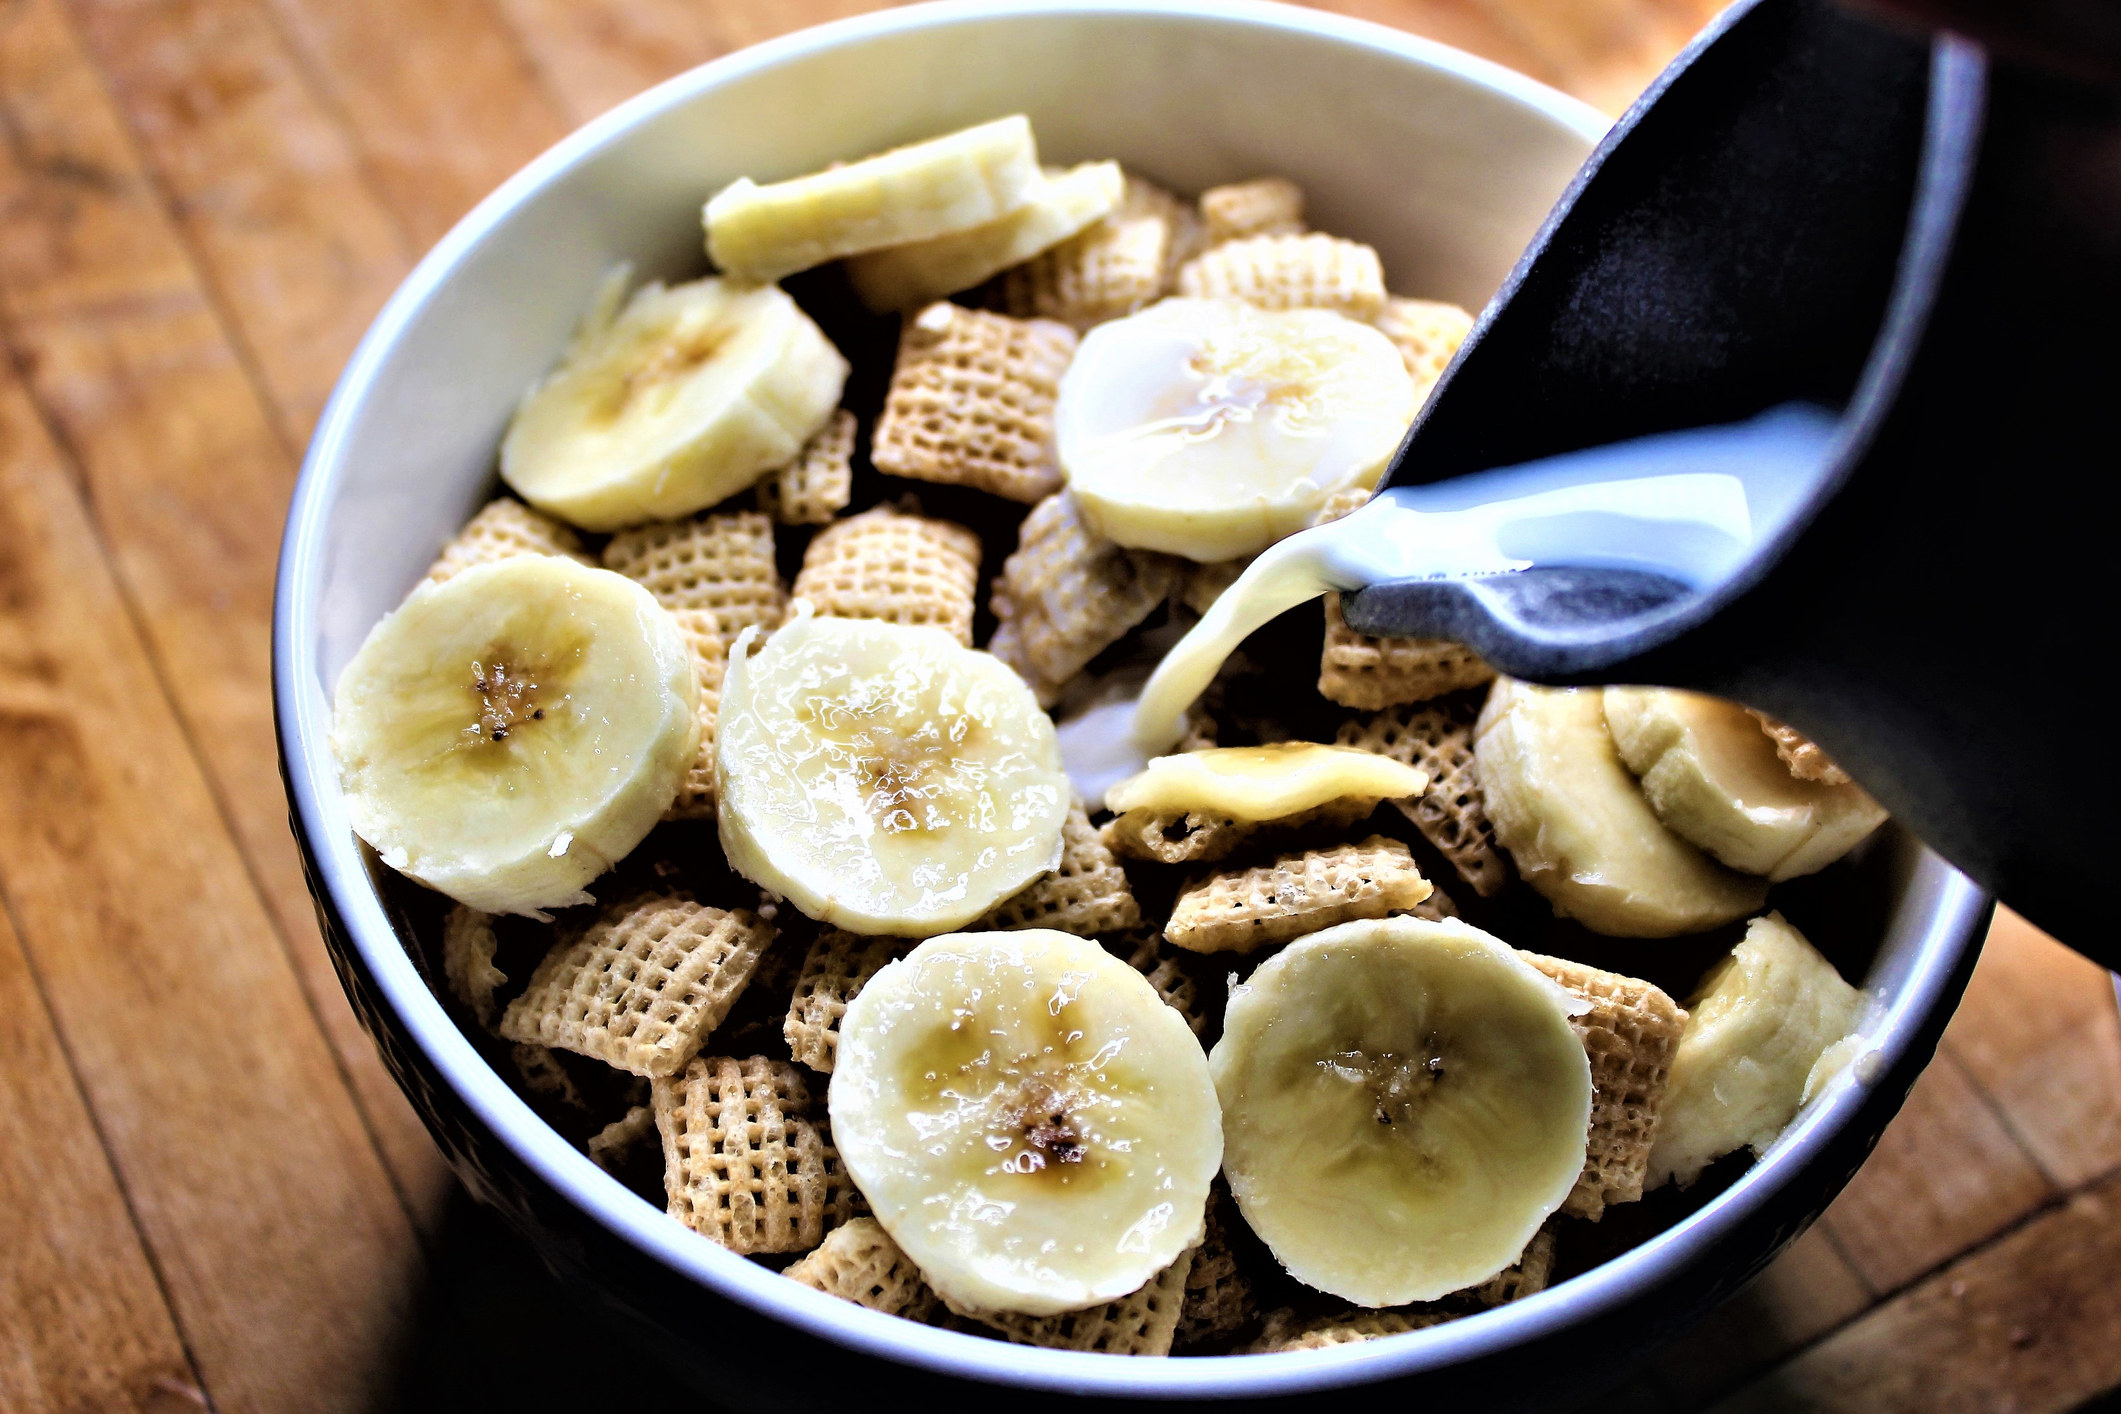 Bananas and Chex cereal in a bowl.